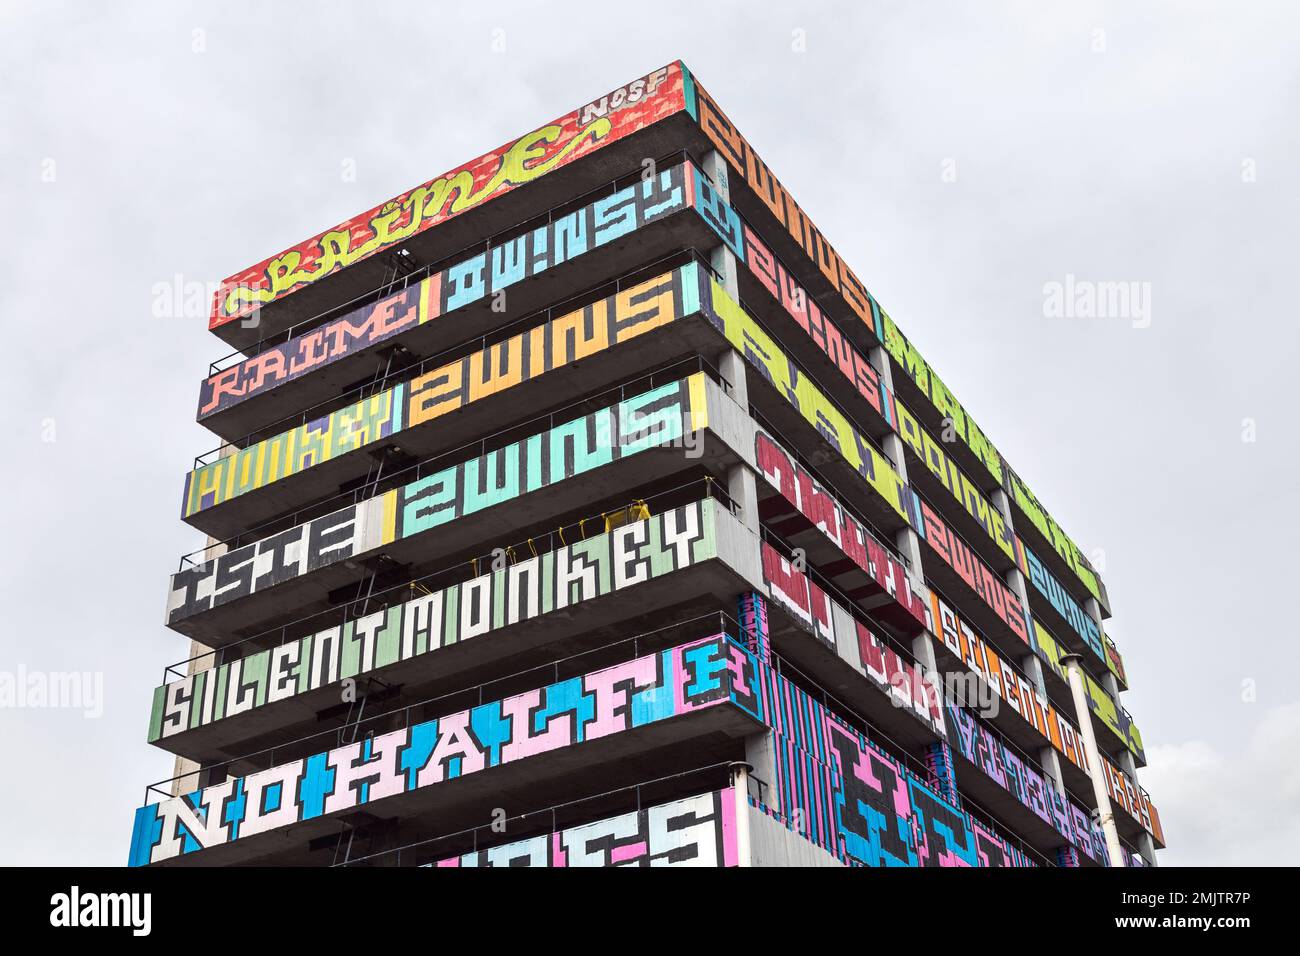 Abandoned Great Eastern Street Car Park covered in colourful graffiti, Shoreditch, London, UK Stock Photo